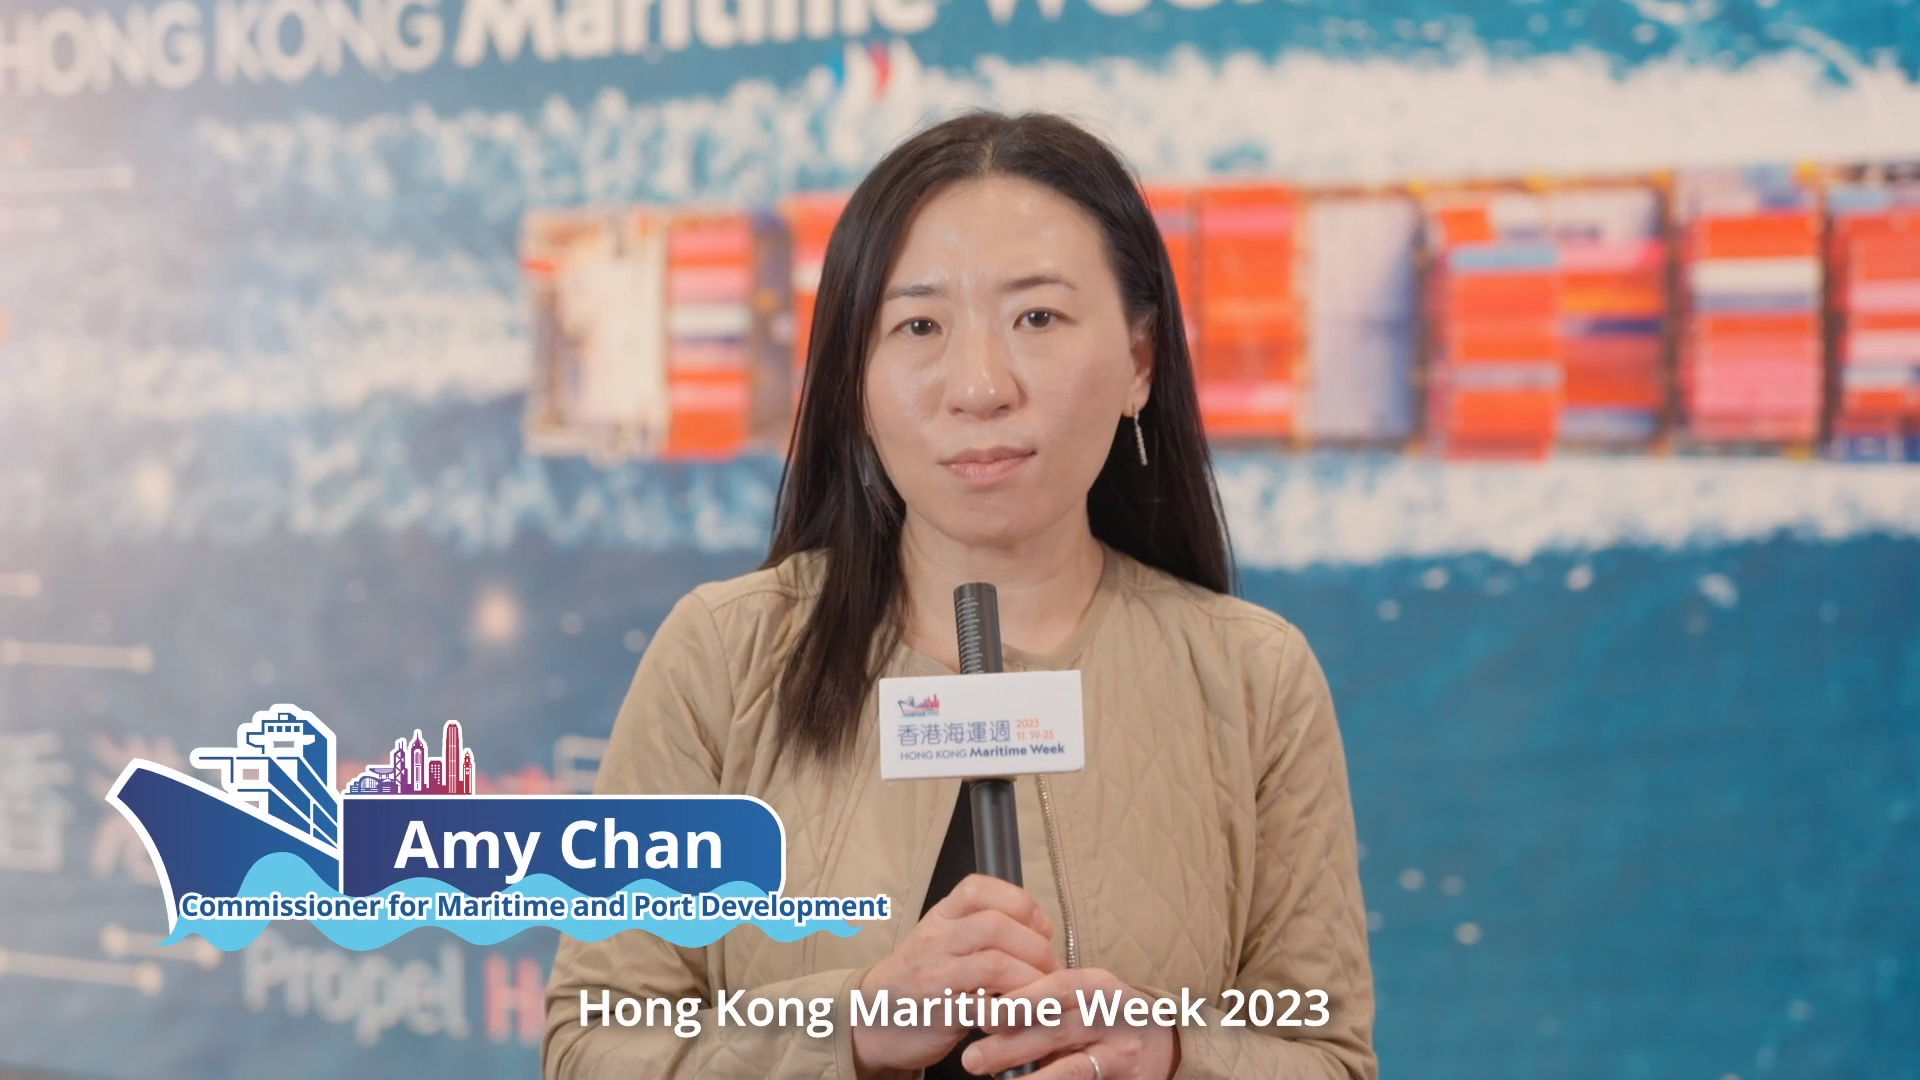 Hong Kong Maritime Week 2023 - Highlights from Miss Amy Chan, Commissioner for Maritime and Port Development